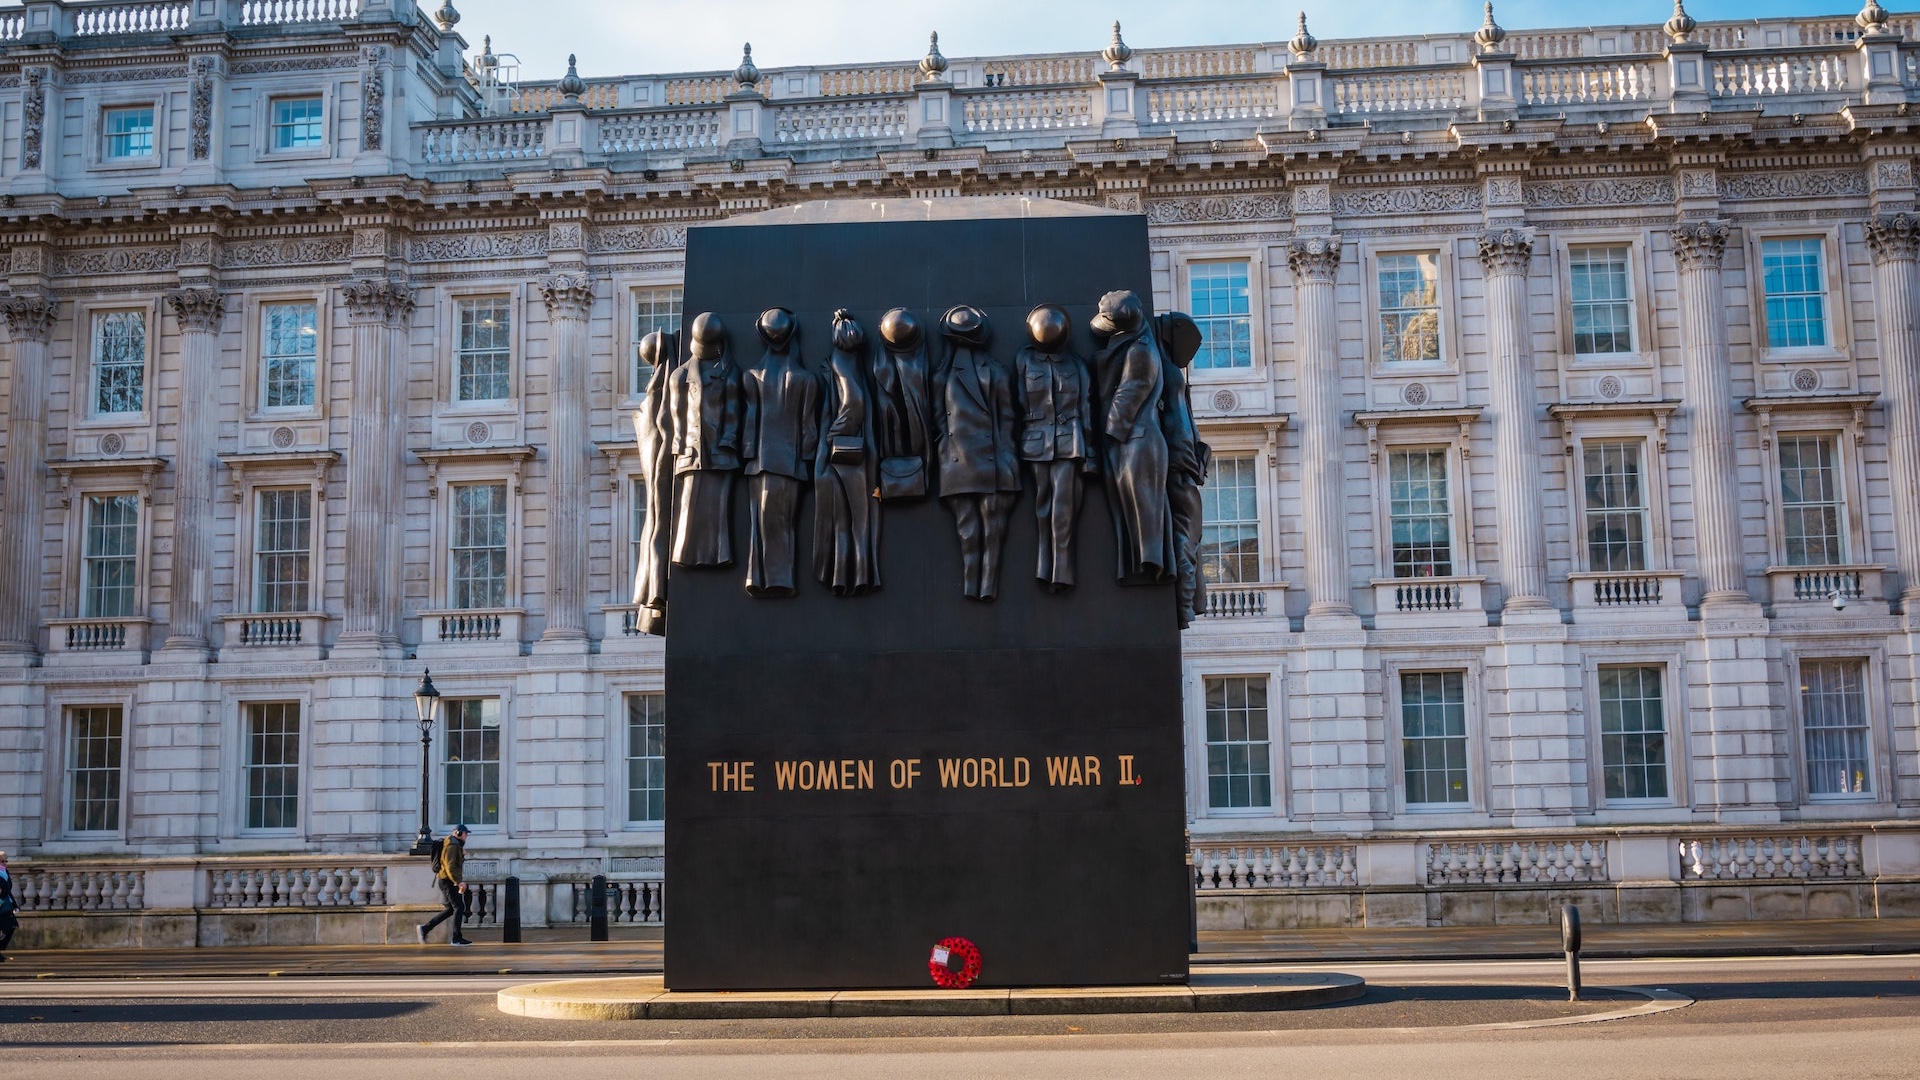 London In Ww2 And Churchill War Rooms